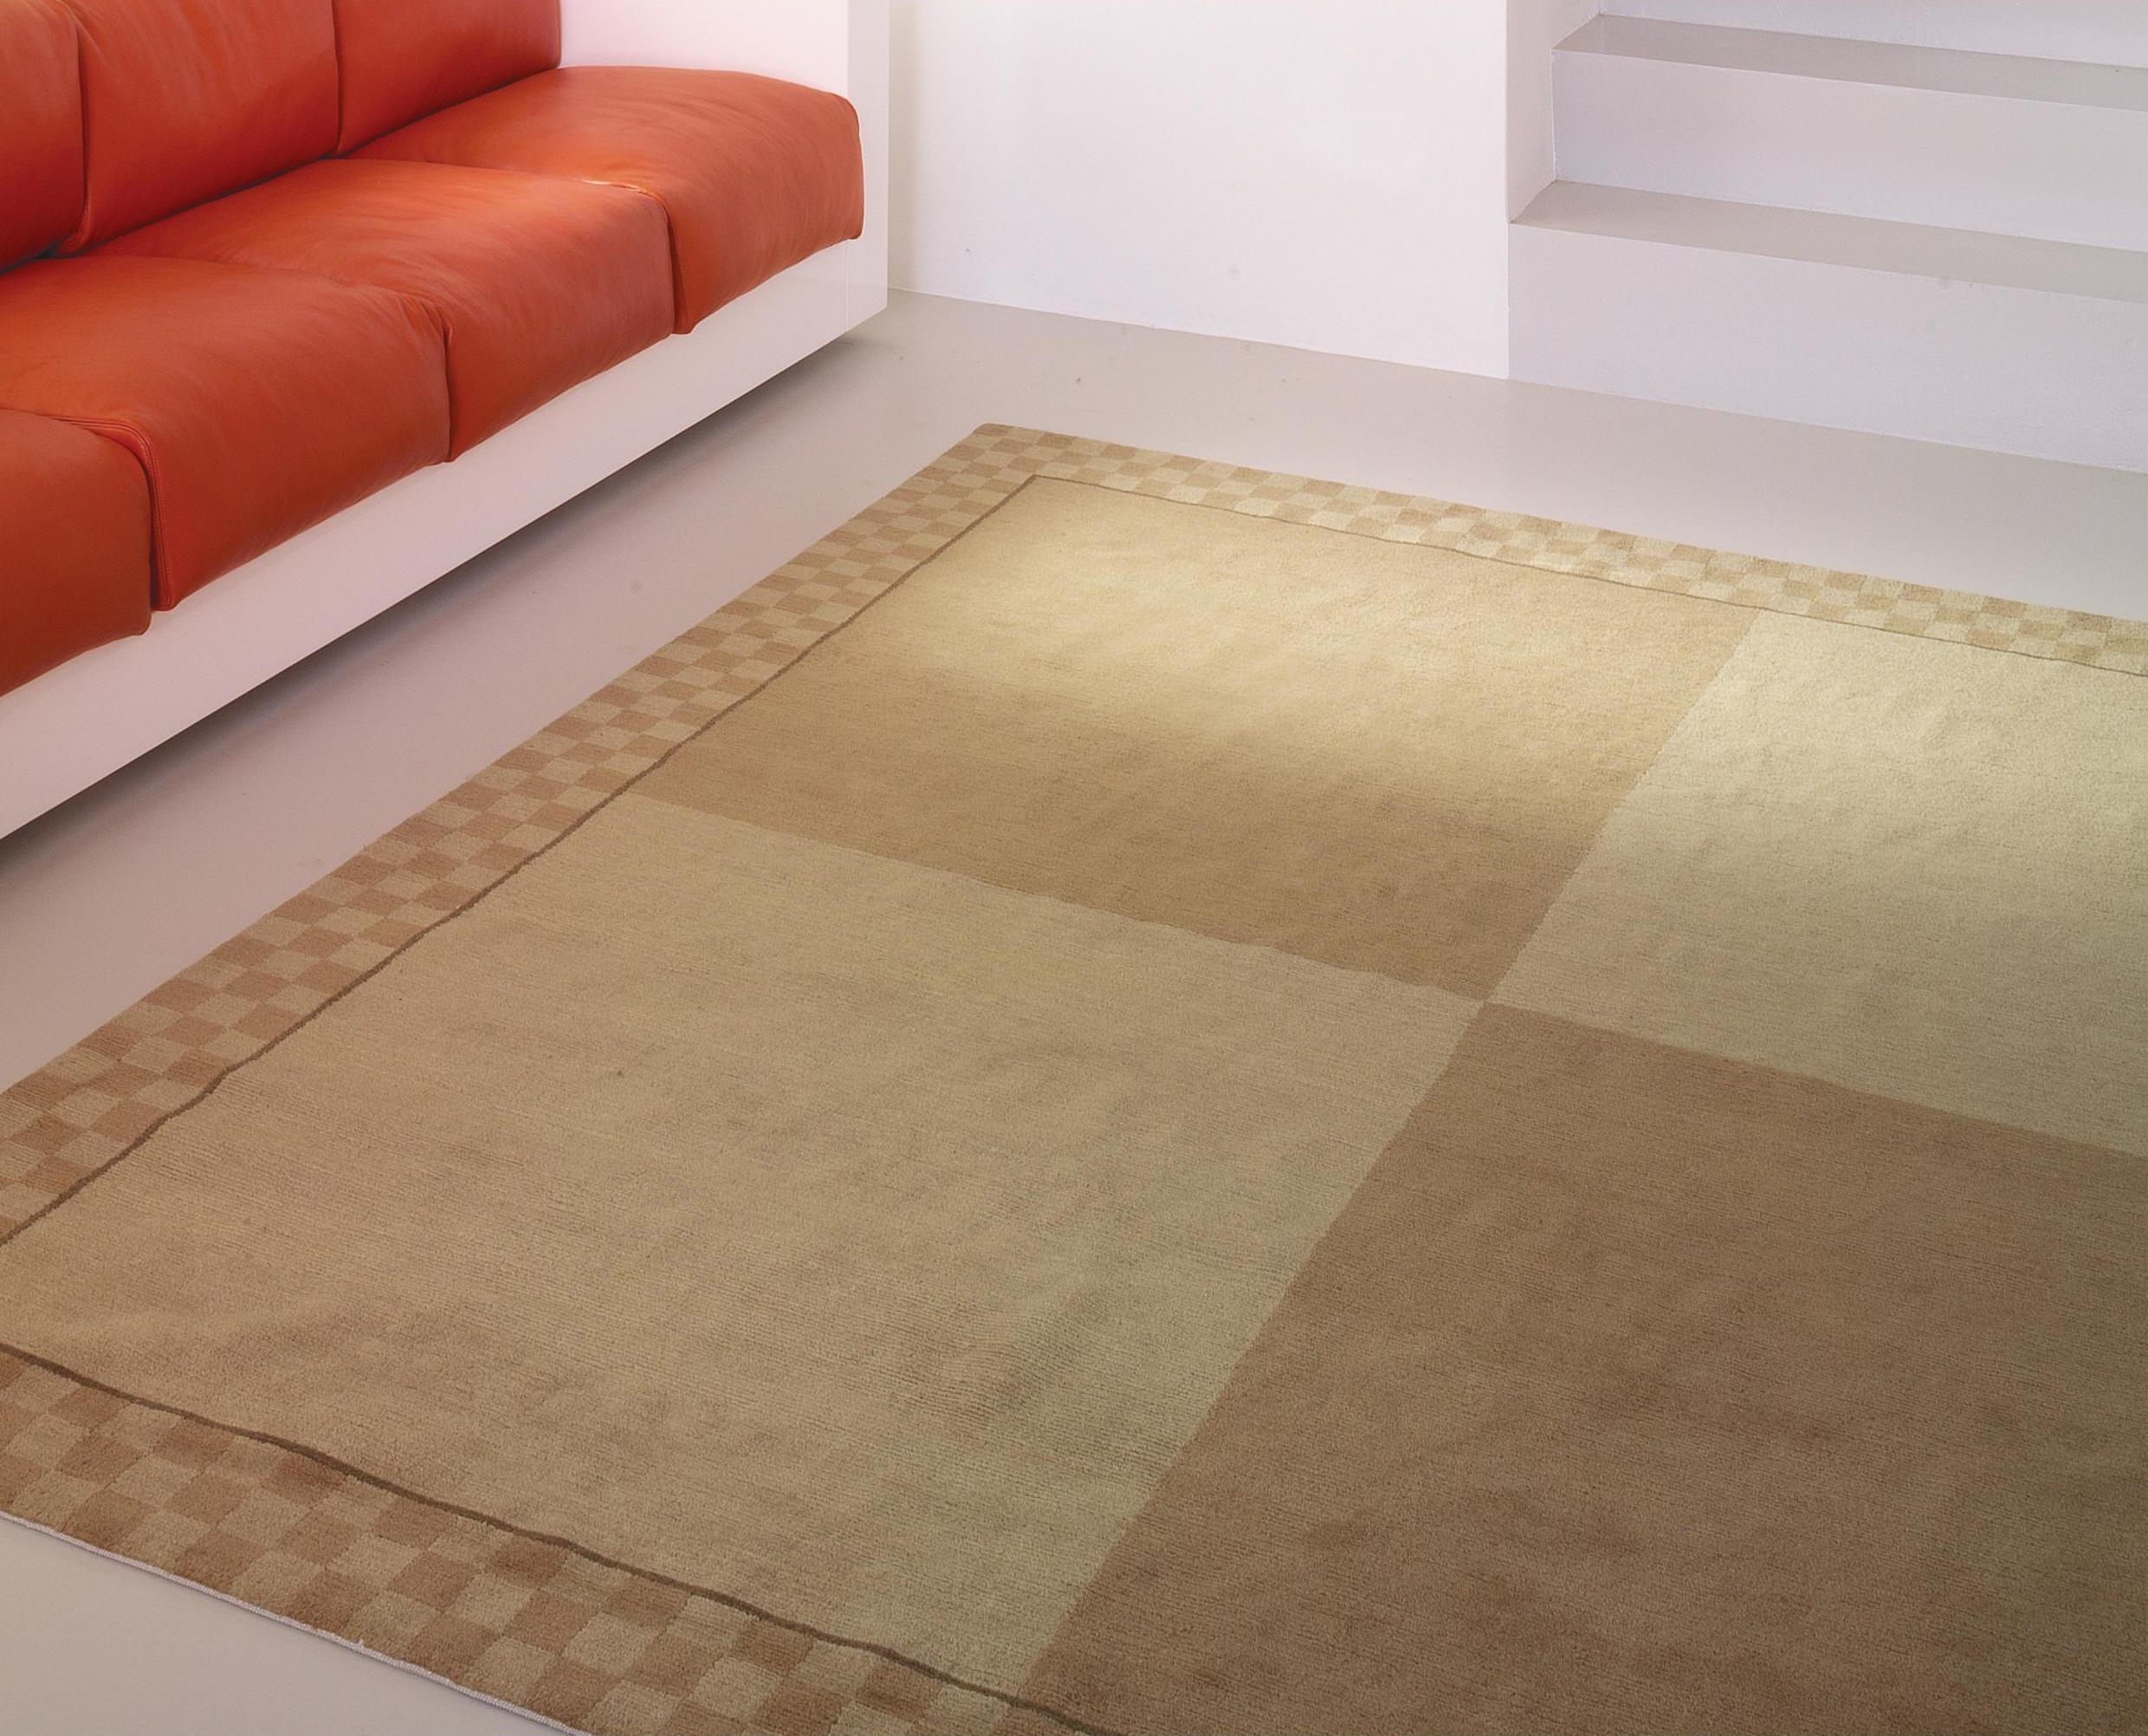 This beautiful rug is unique stylish and ready to accent your decor with authentic elegance.
Made in Nepal, is completely woven by hand, knot by knot with extreme care and skill. After the manufacturing process it is hand washed, long and repeated